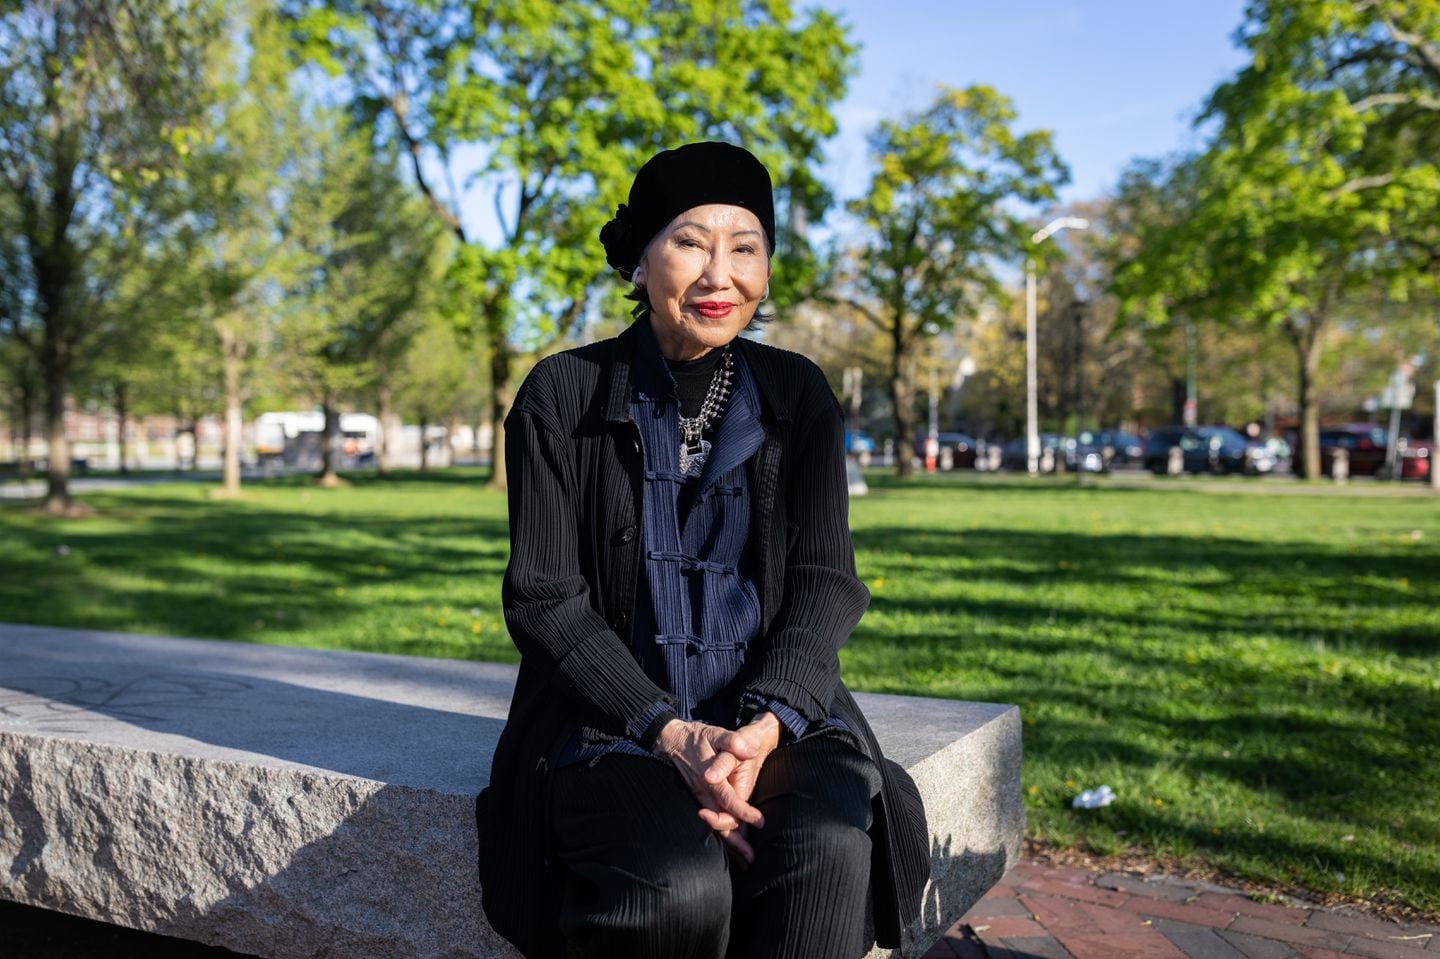 Amy Tan, pictured here in a park near Harvard Square, was recently in Cambridge on a book tour for her latest work, "The Backyard Bird Chronicles."